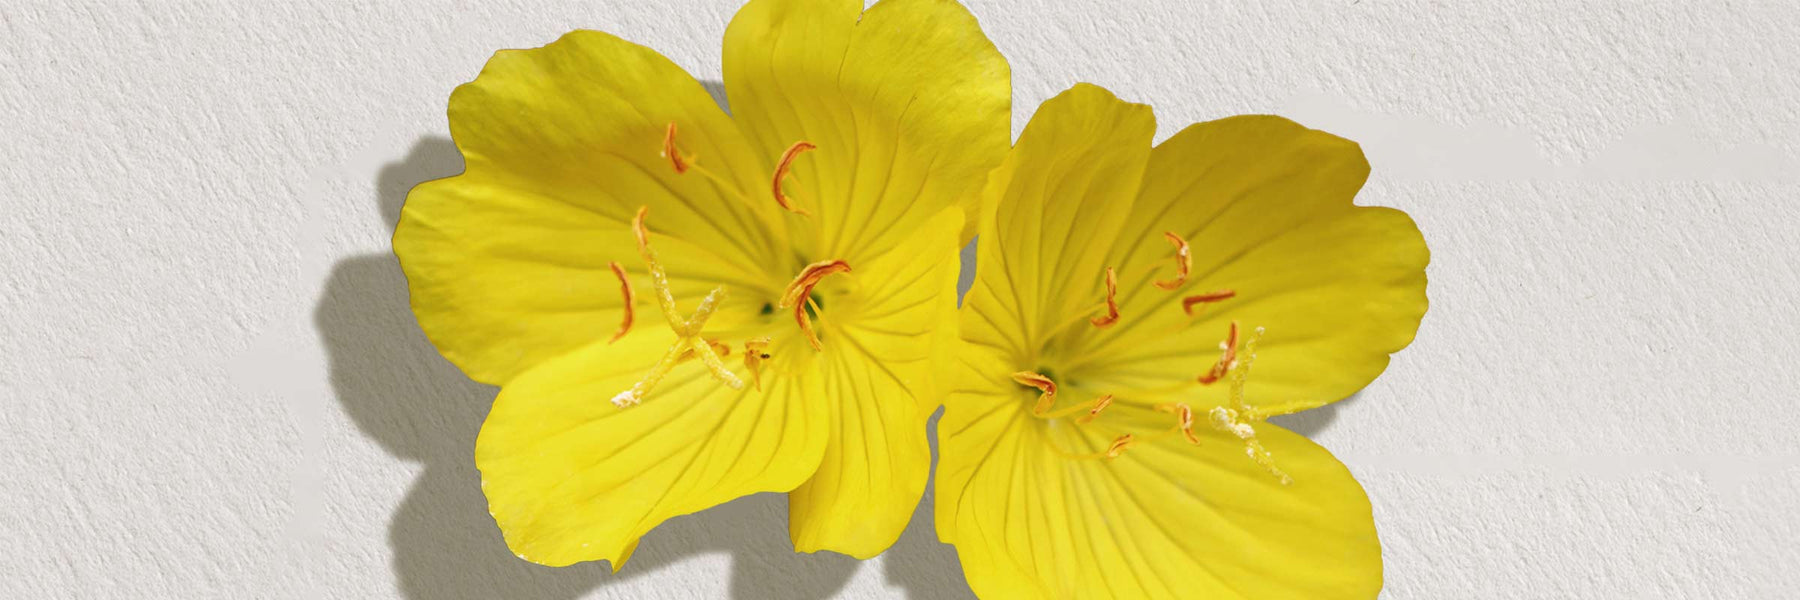 Evening Primrose Oil for Skin: Benefits, How to Use